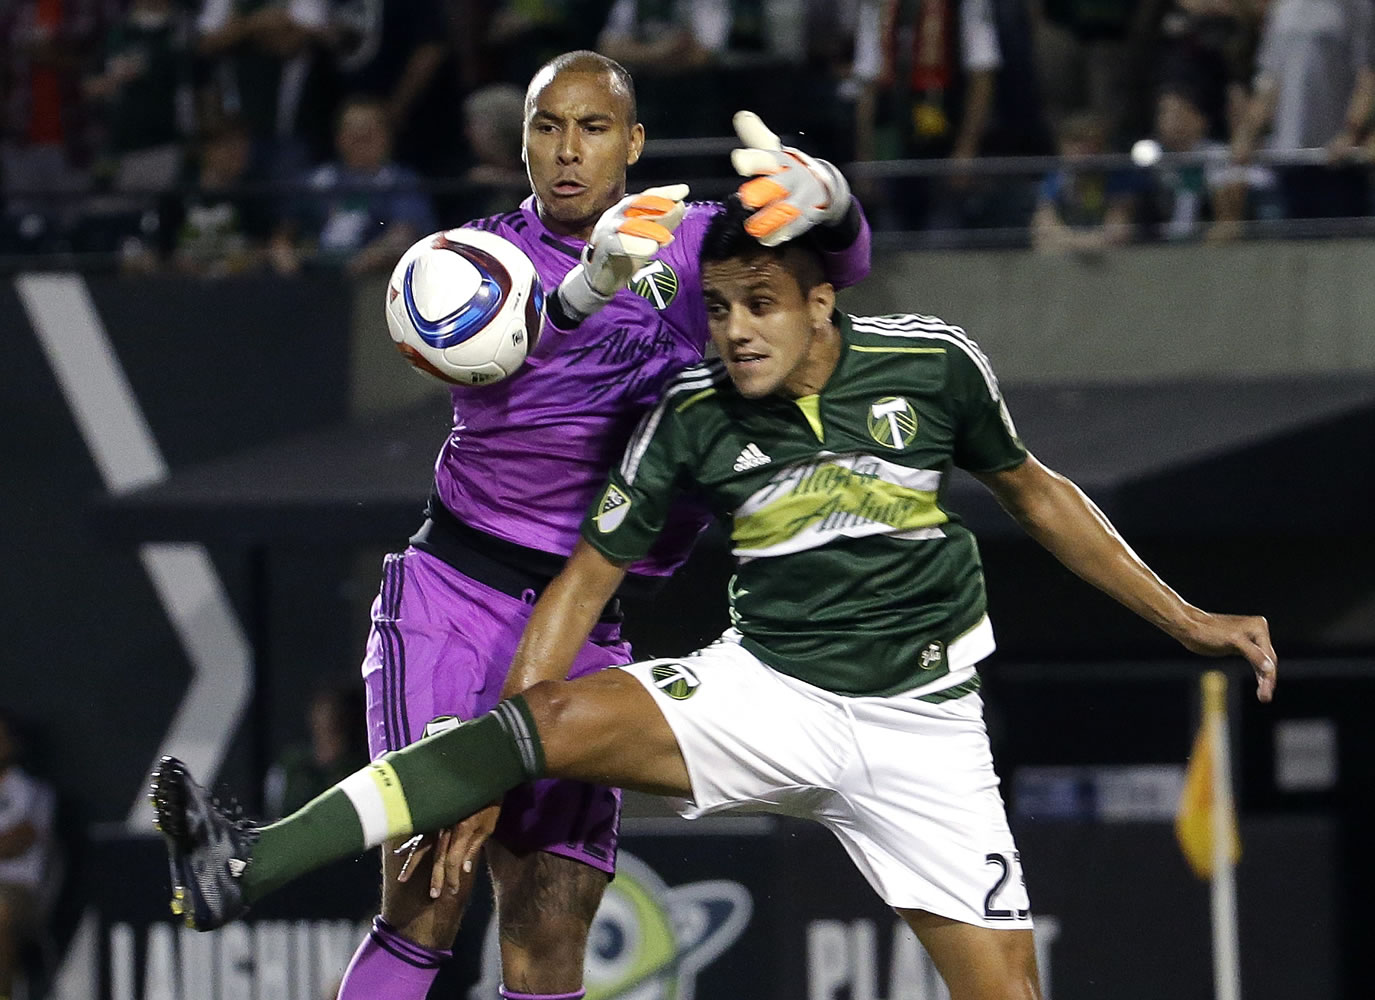 Portland Timbers goalkeeper Adam Kwarasey, left, goes over his defender Norberto Paparatto to grab a corner kick during the first half of an MLS soccer match against Sporting Kansas City in Portland, Ore., Wednesday, Sept. 9, 2015.